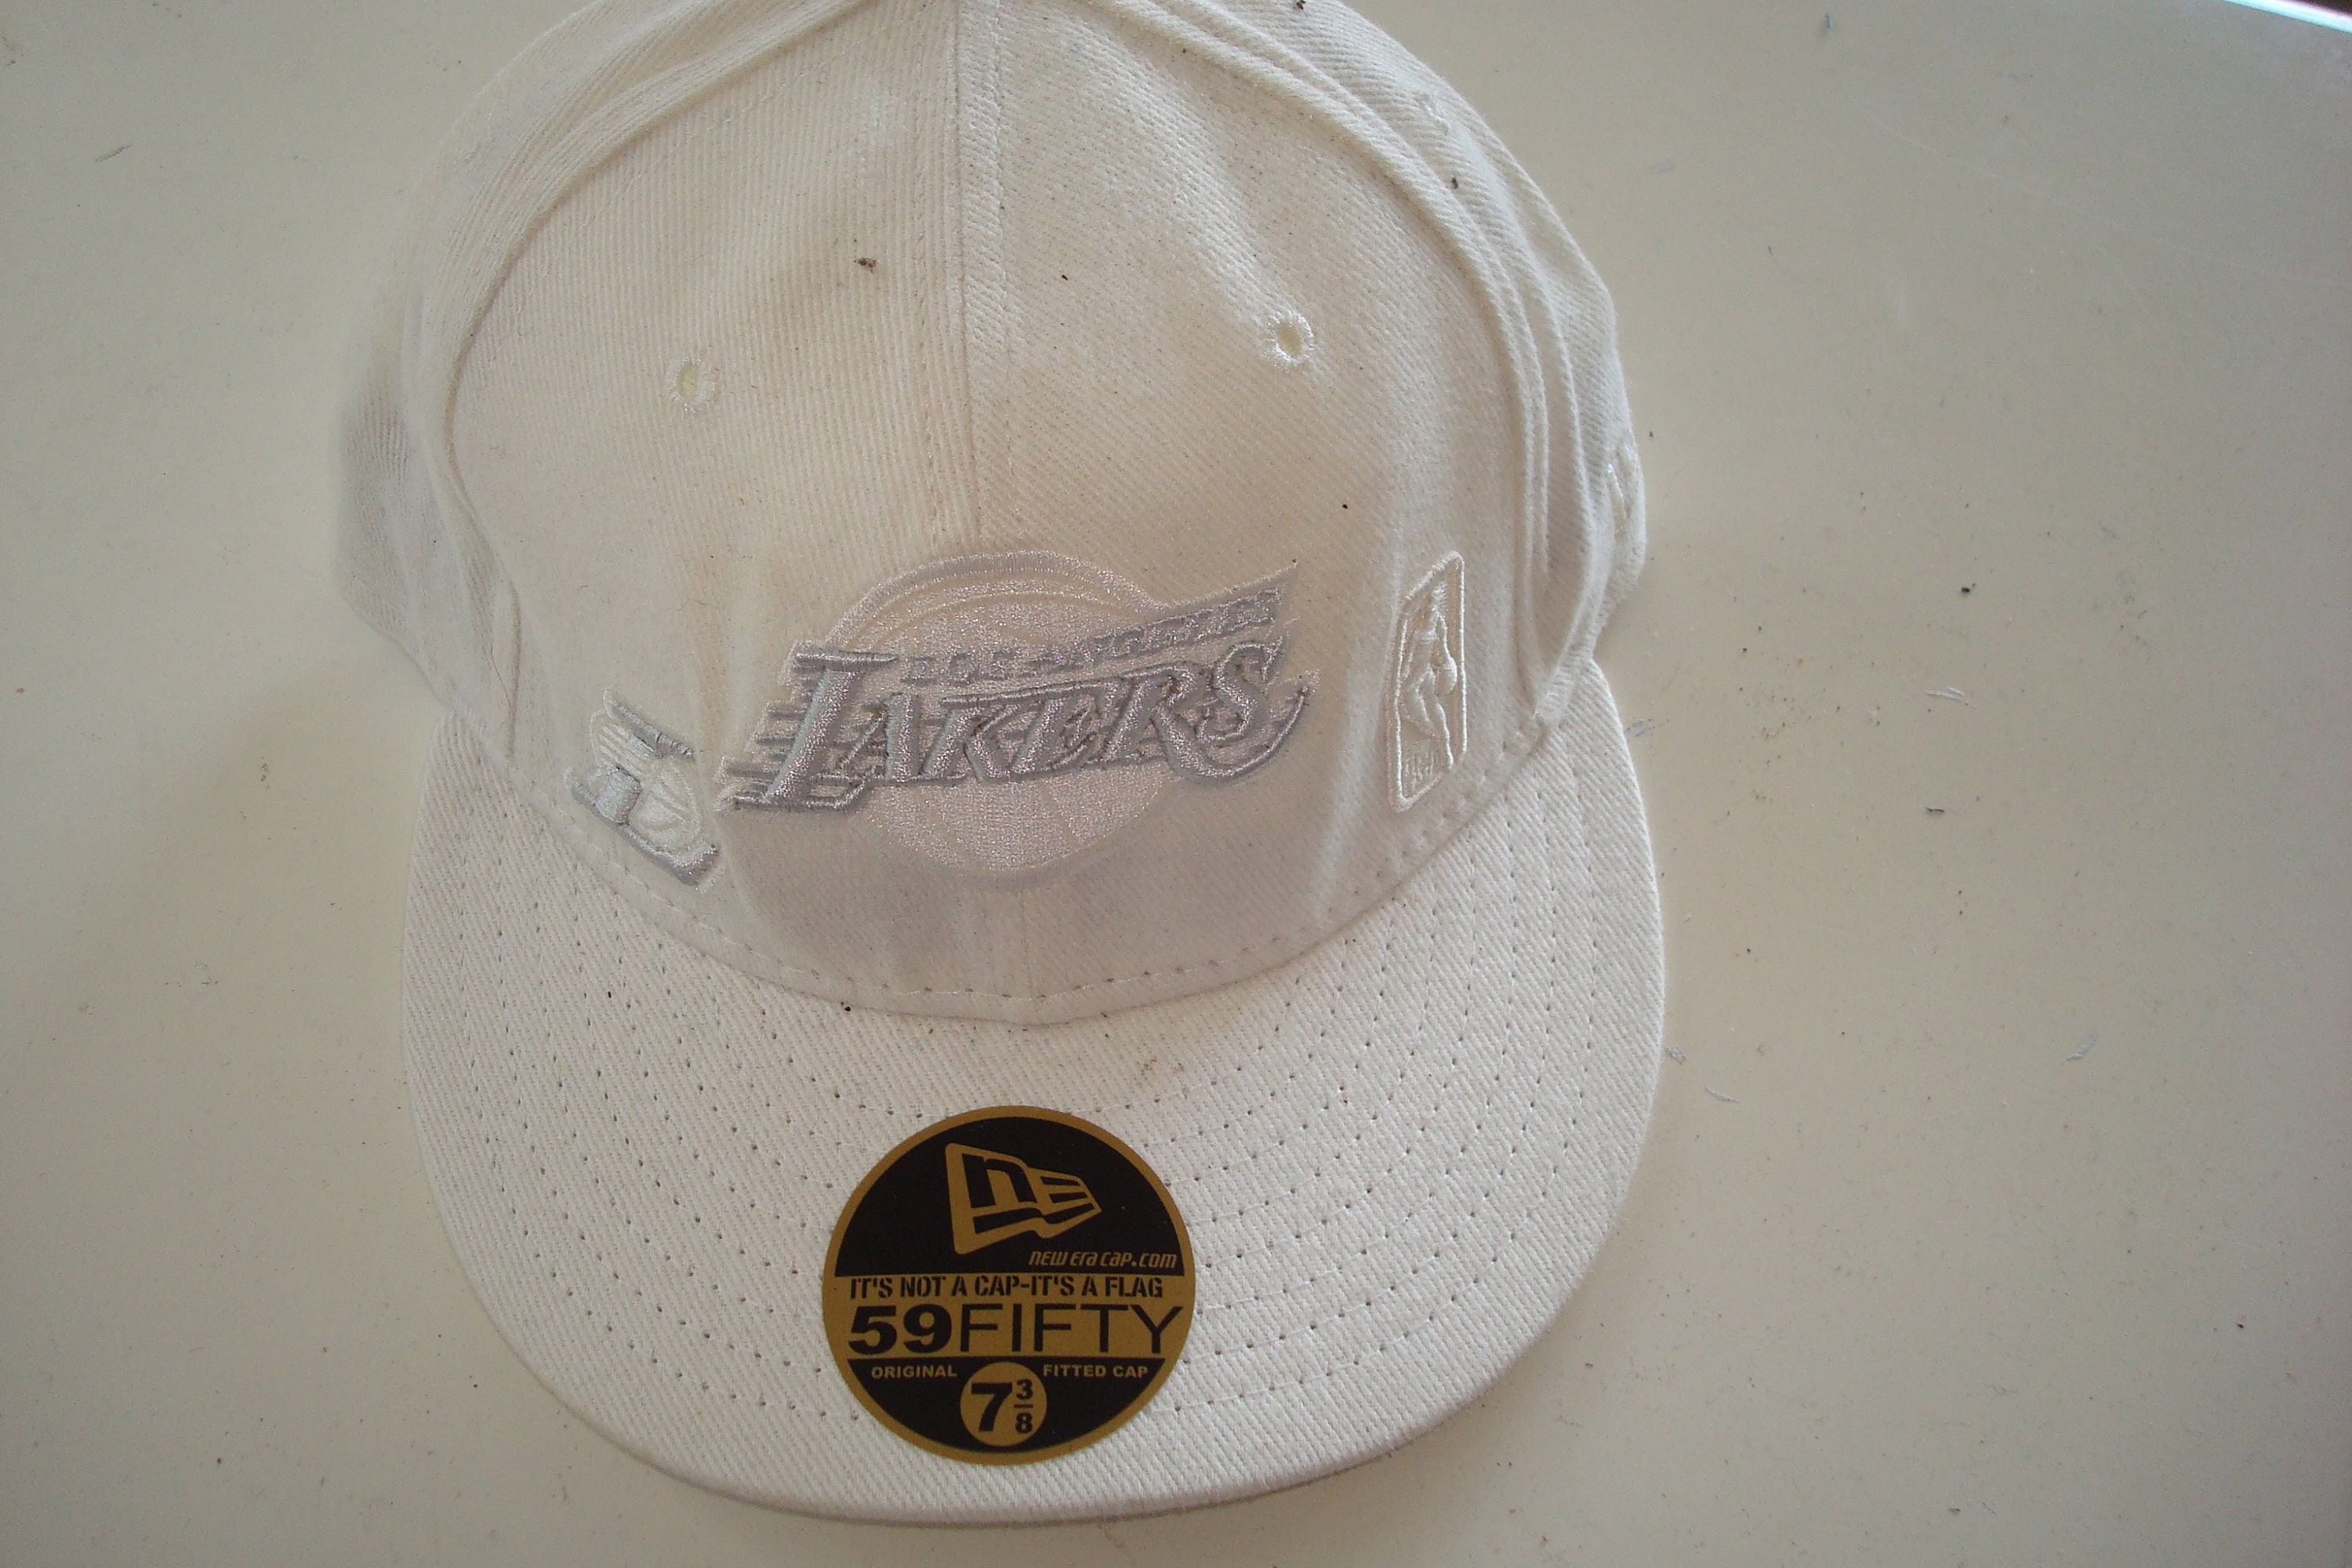 NIKE LA LAKERS THROWBACK CAP HAT FITTED LARGE FITS 7 3/8- 7 1/2- 7 5/8 Pro  Swish